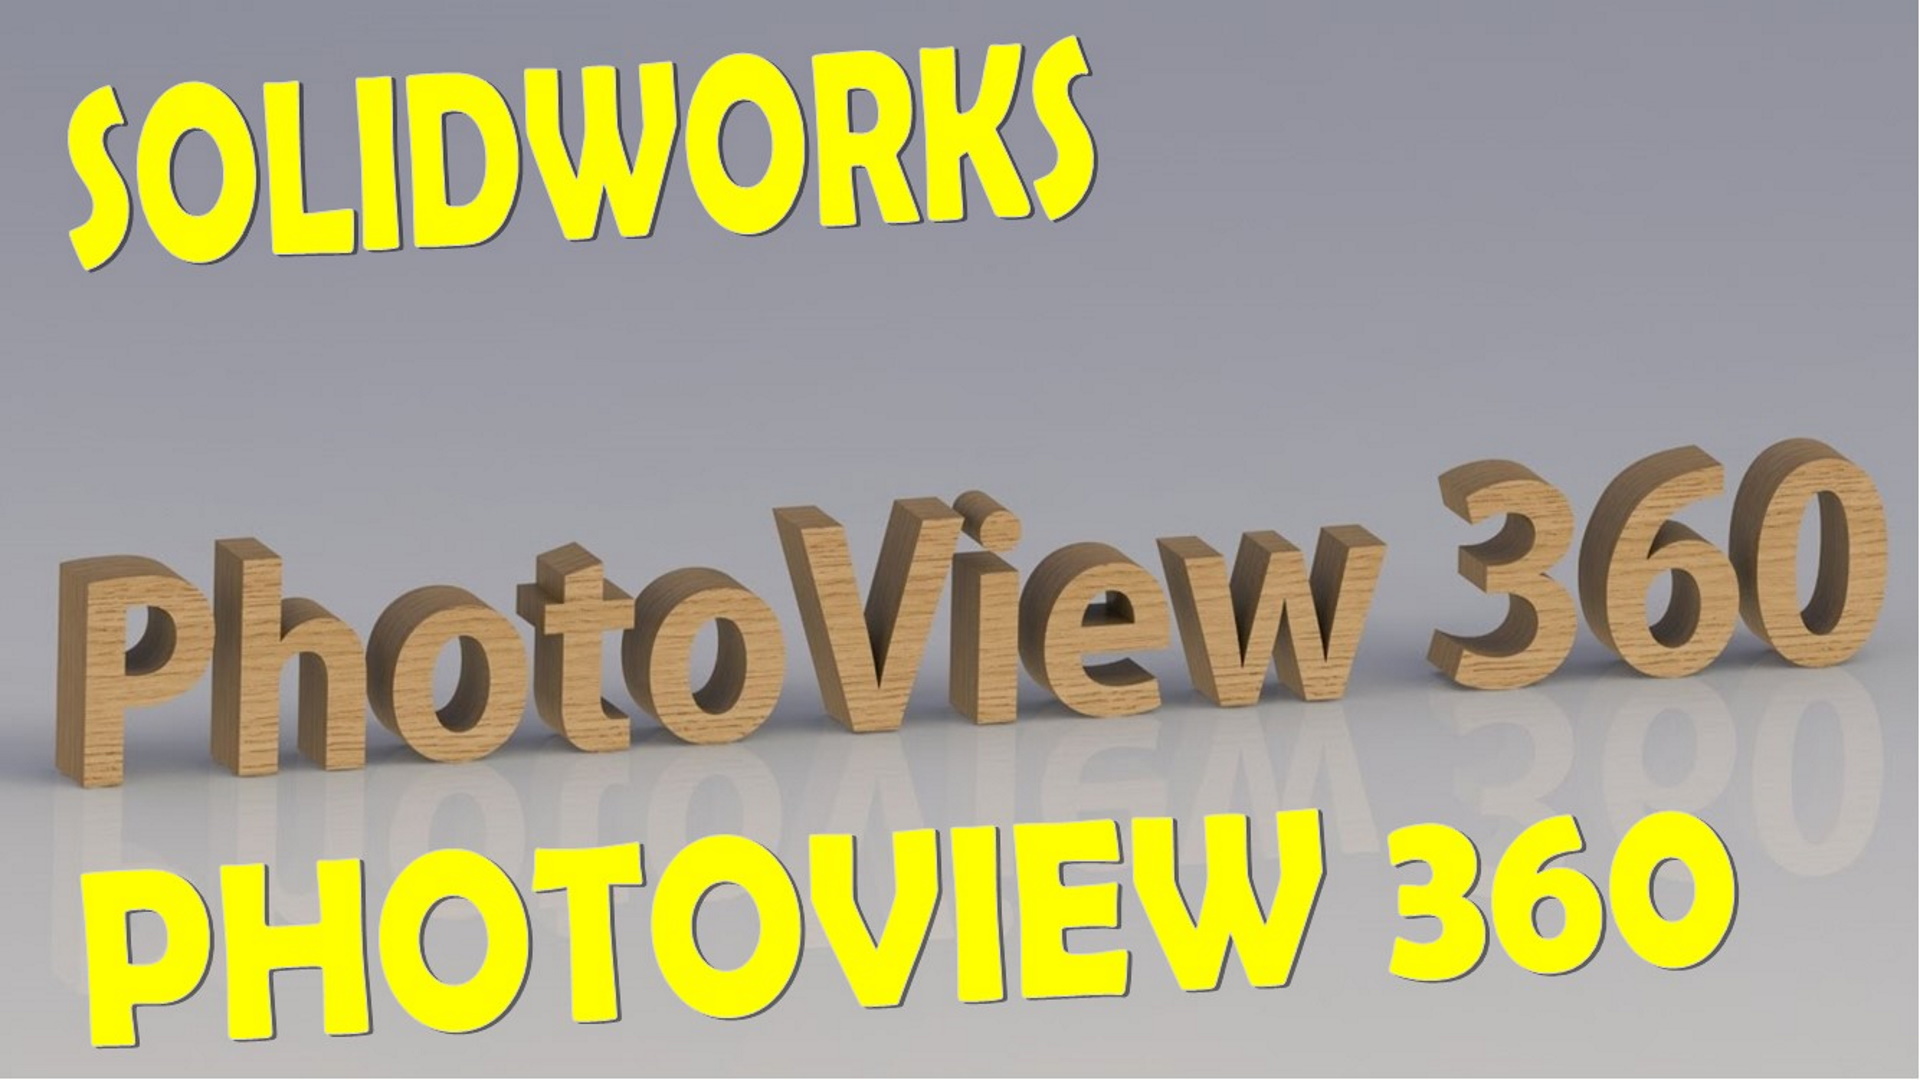 PhotoView 360 (SolidWorks)